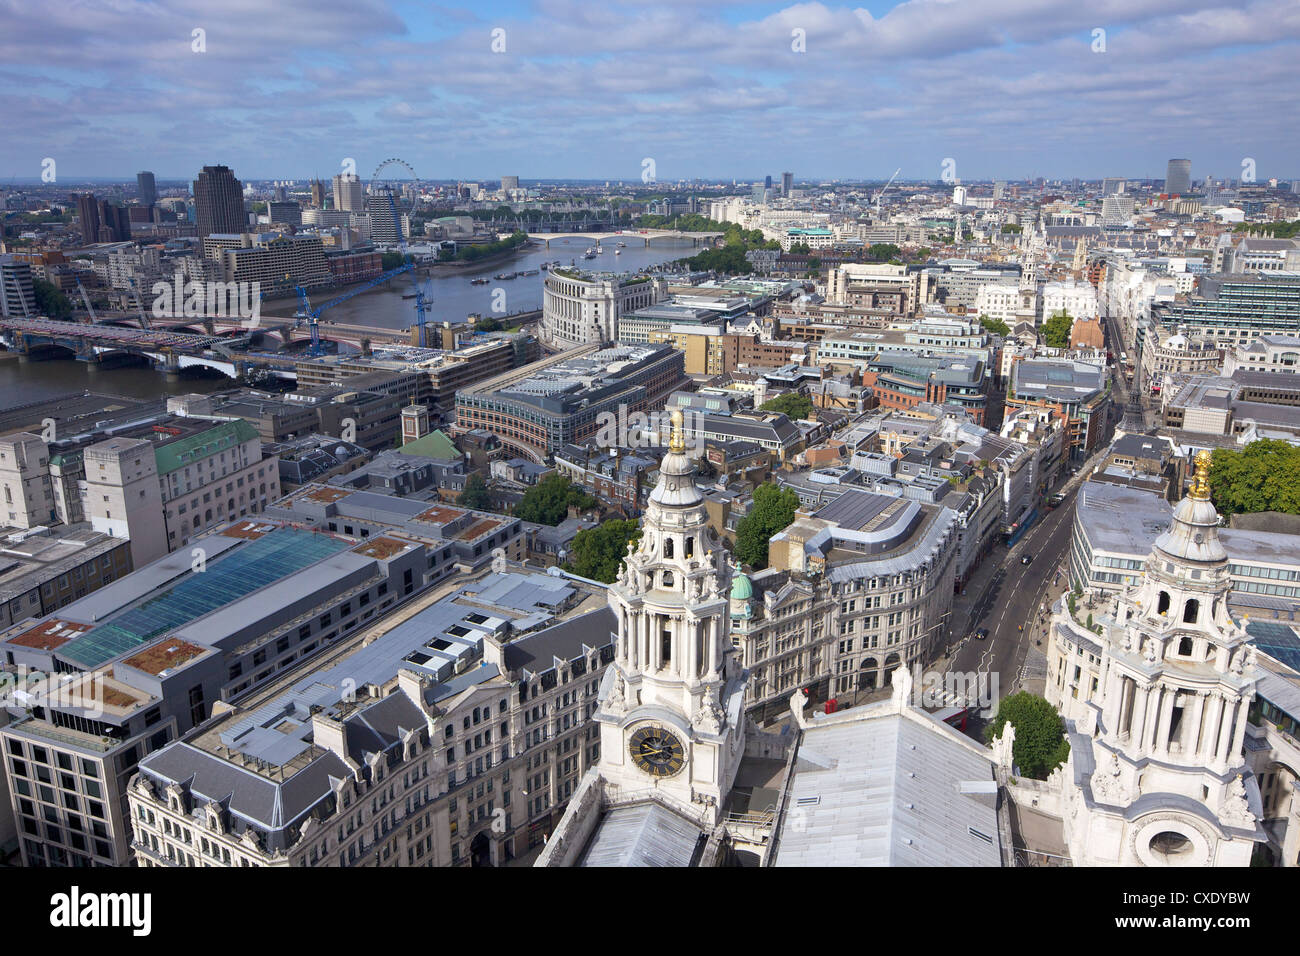 Aerial view of London taken from the Golden Gallery of St. Paul's Cathedral, City of London, England, United Kingdom, Europe Stock Photo